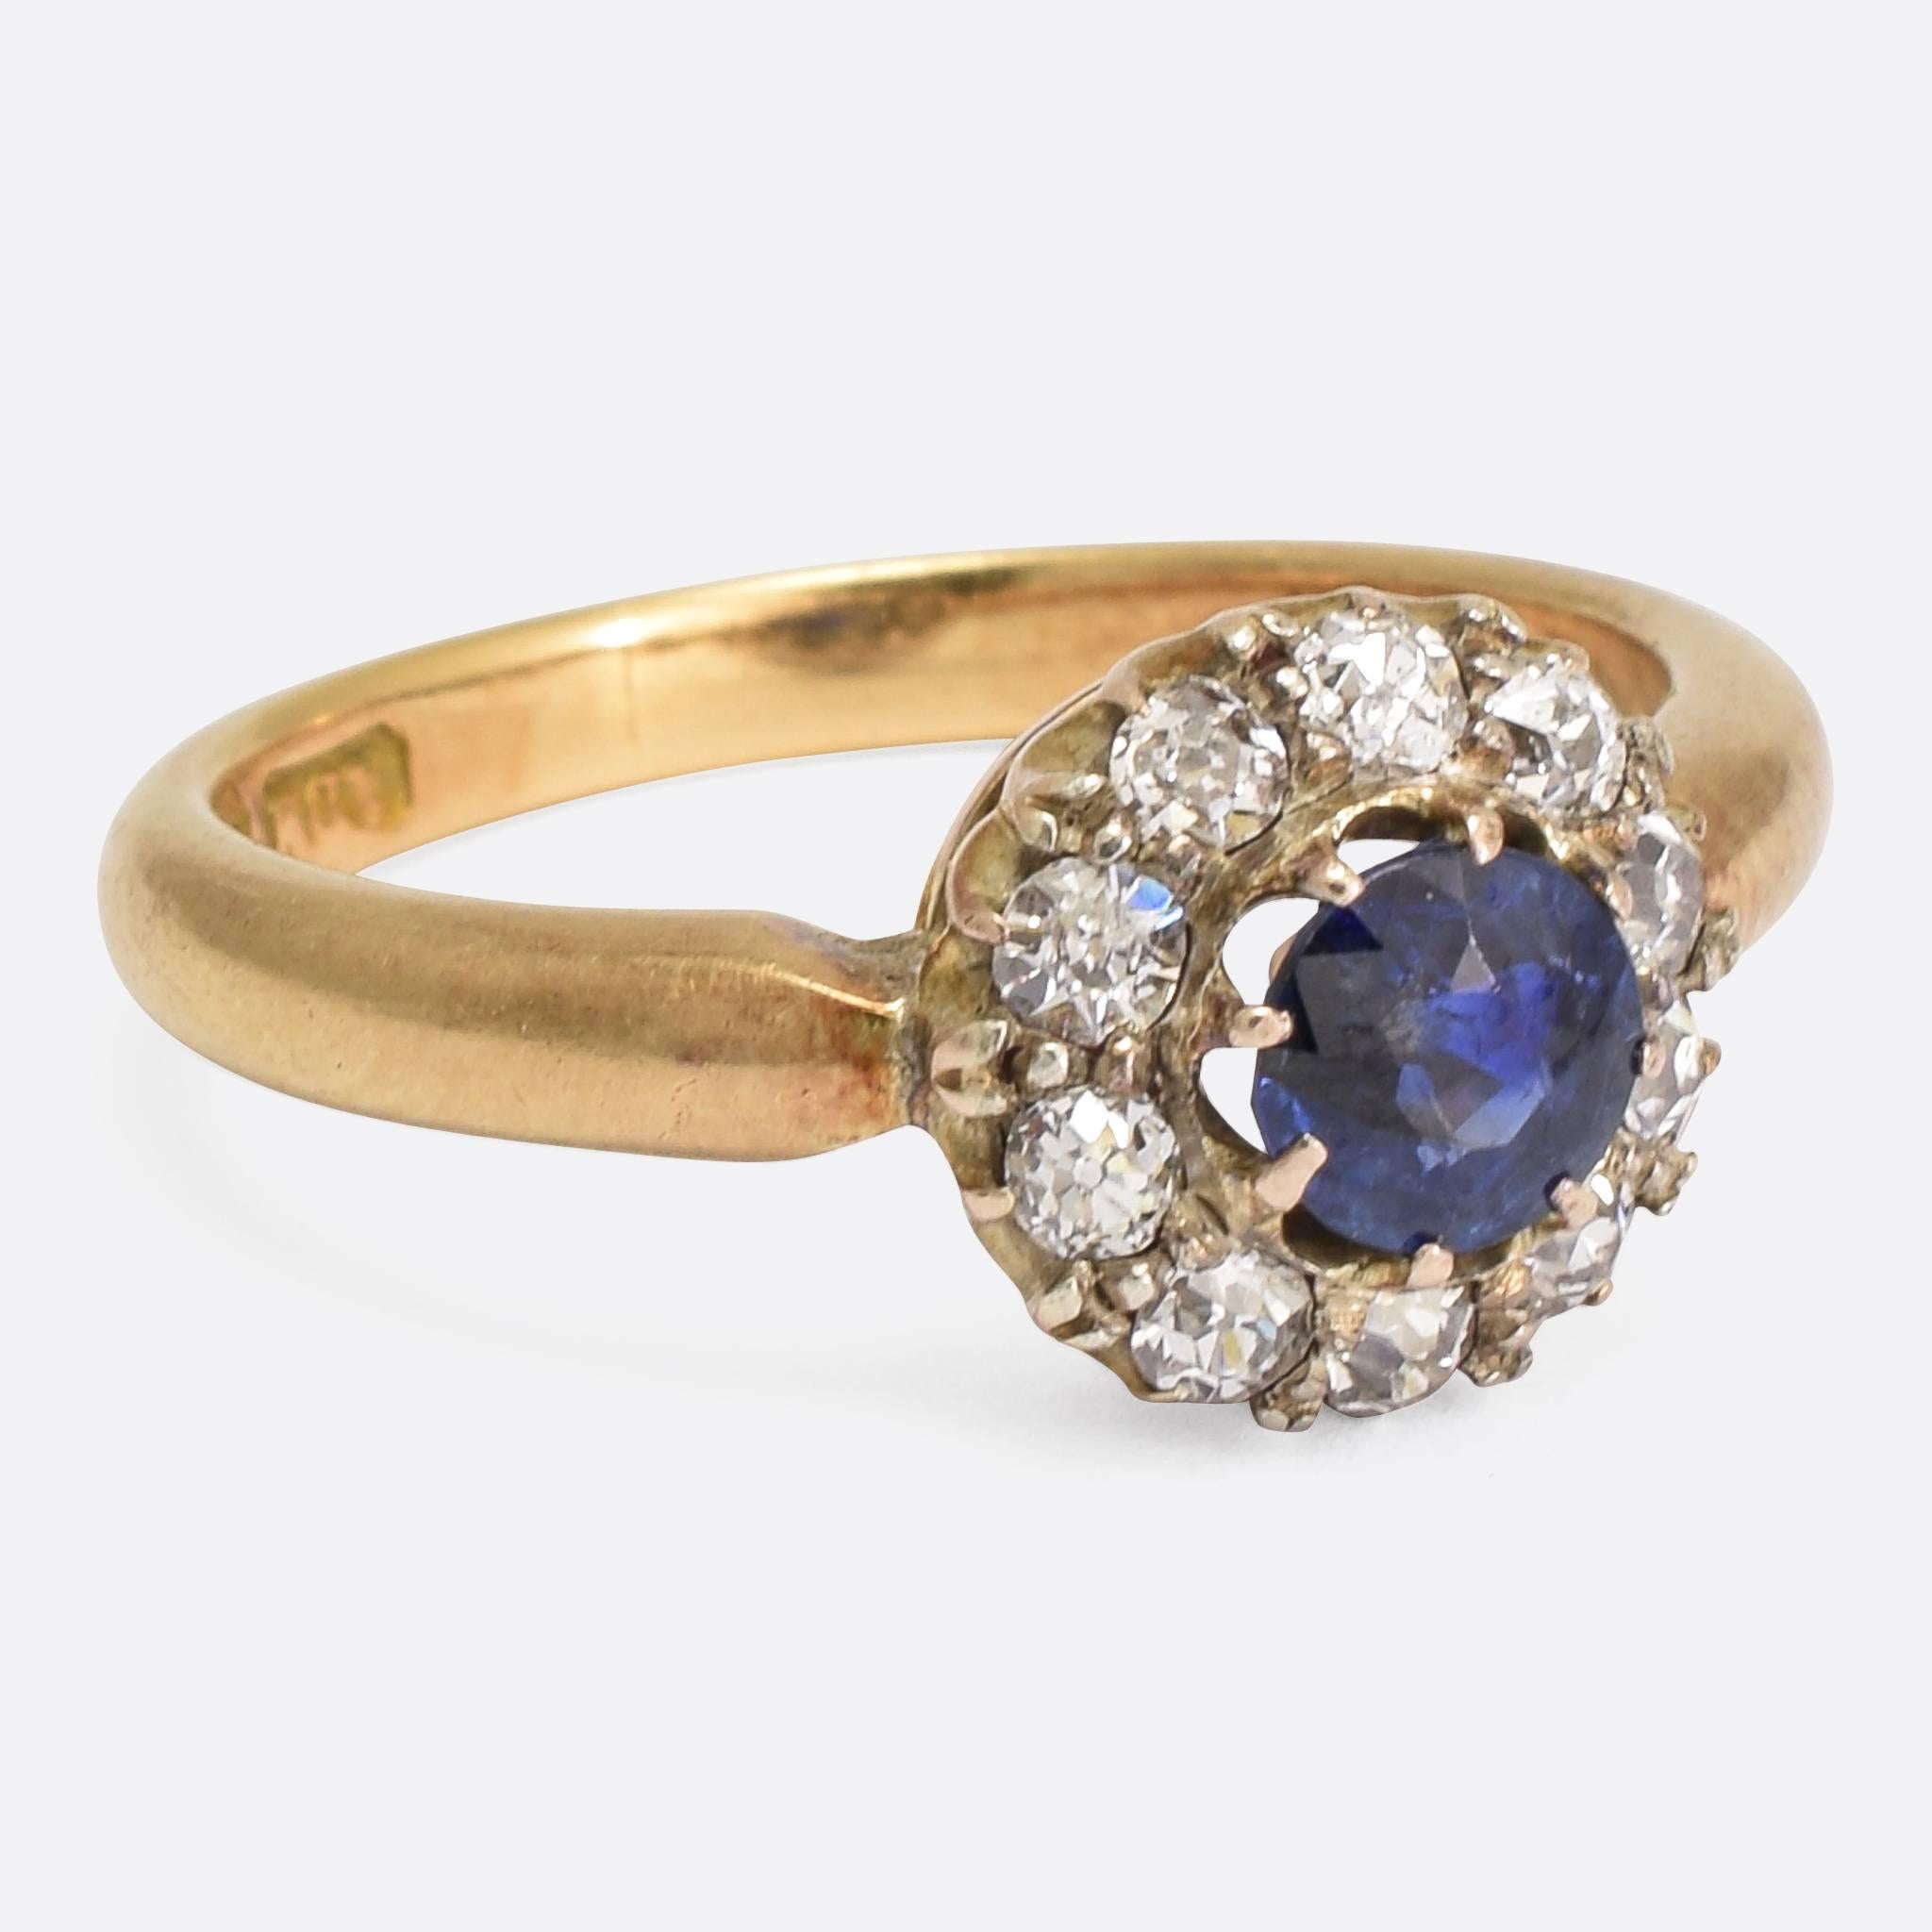 This pretty antique cluster ring is set with a central .50ct blue sapphire, surrounded by a halo of old cut diamonds. The round head has an open gallery, allowing light behind the stones, and the ring is modelled in 18k yellow gold throughout.